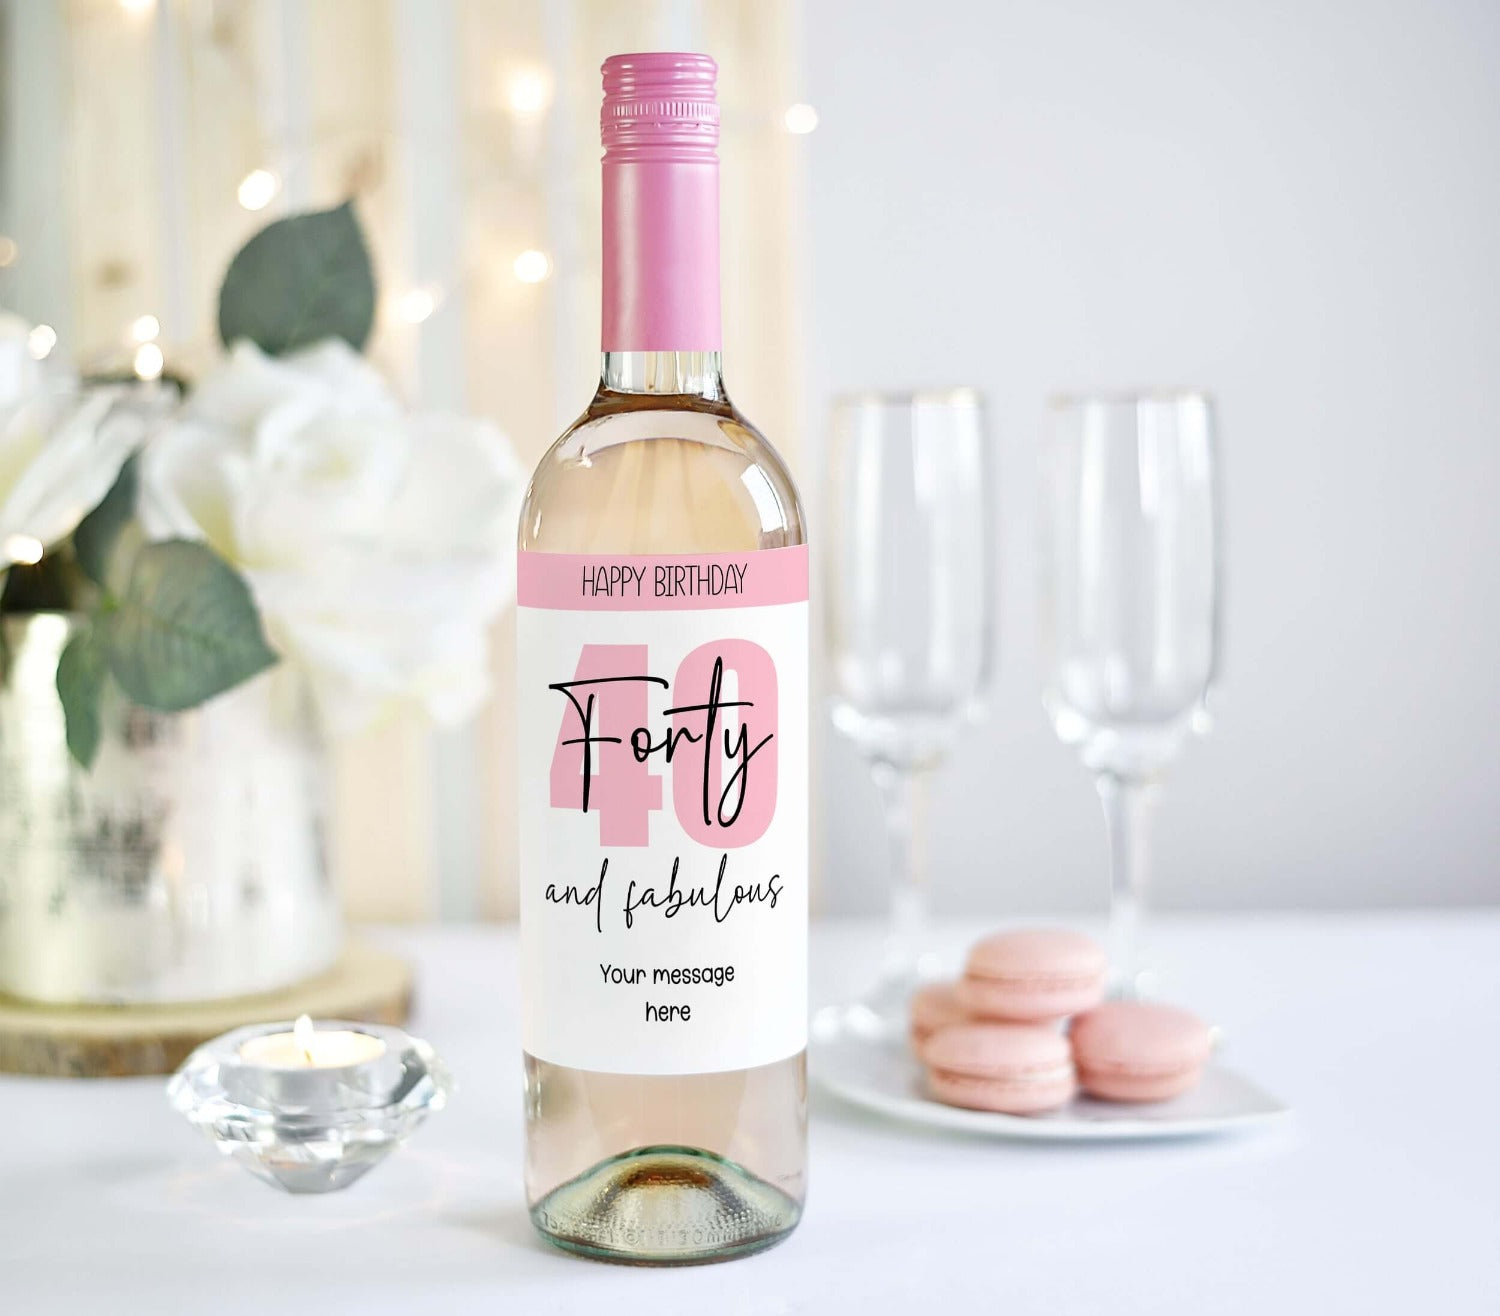 40 and fabulous personalised wine bottle label